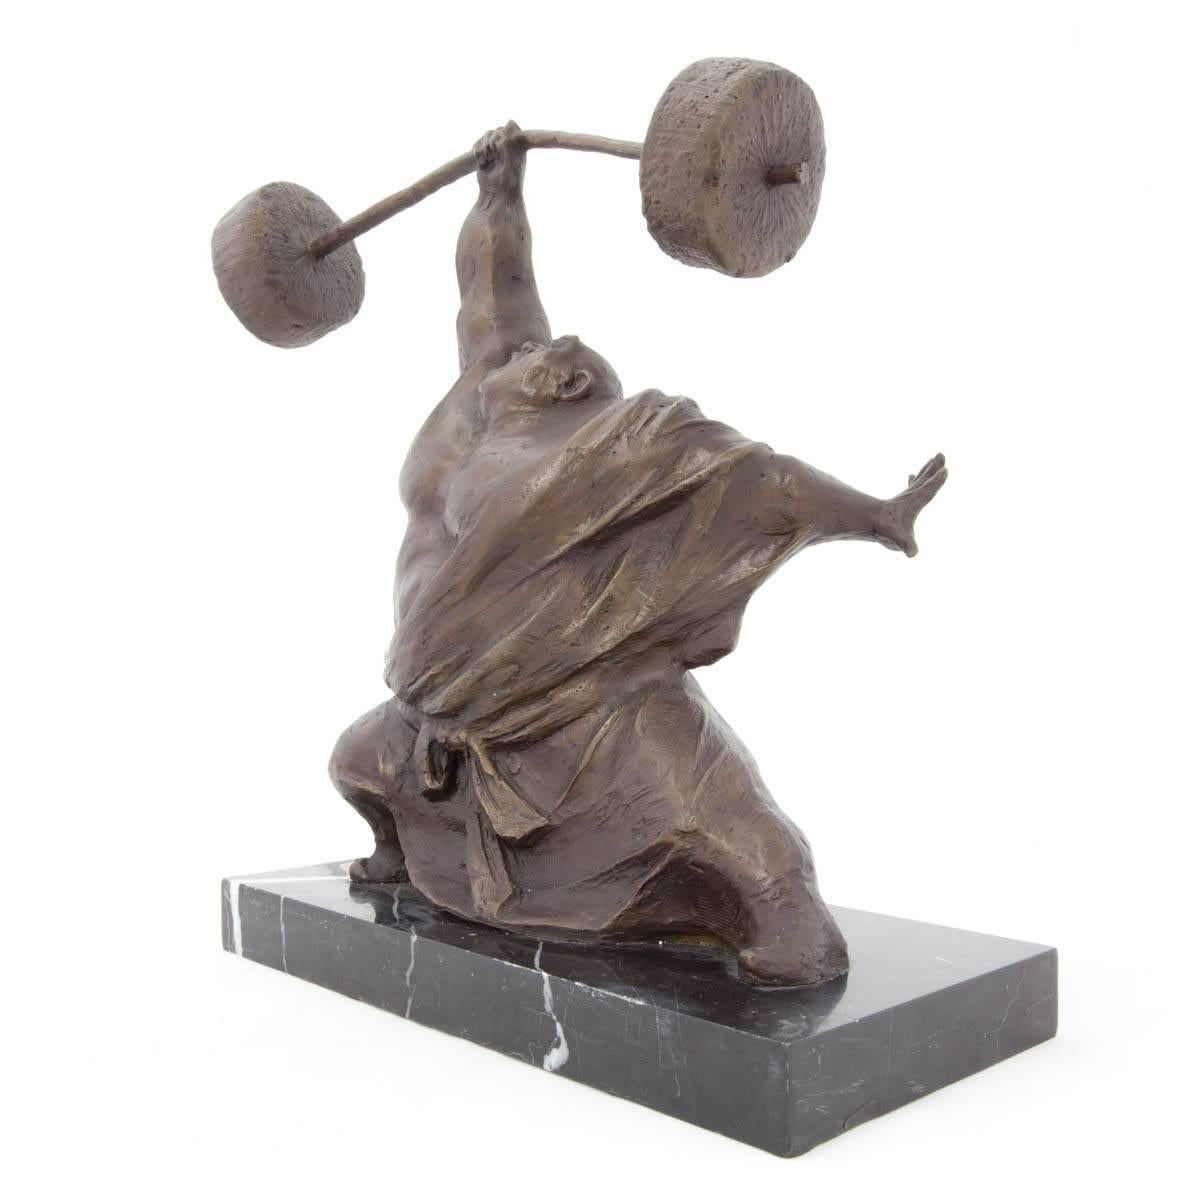 Chinese Contemporary art sculpture. Weight lifter, body builder with bar bell. Yaohui Wu was born on November 2, 1964 in China. Passionate about painting, calligraphy and sculpture, he turned to boxwood carving under the tutelage of master Jinshun